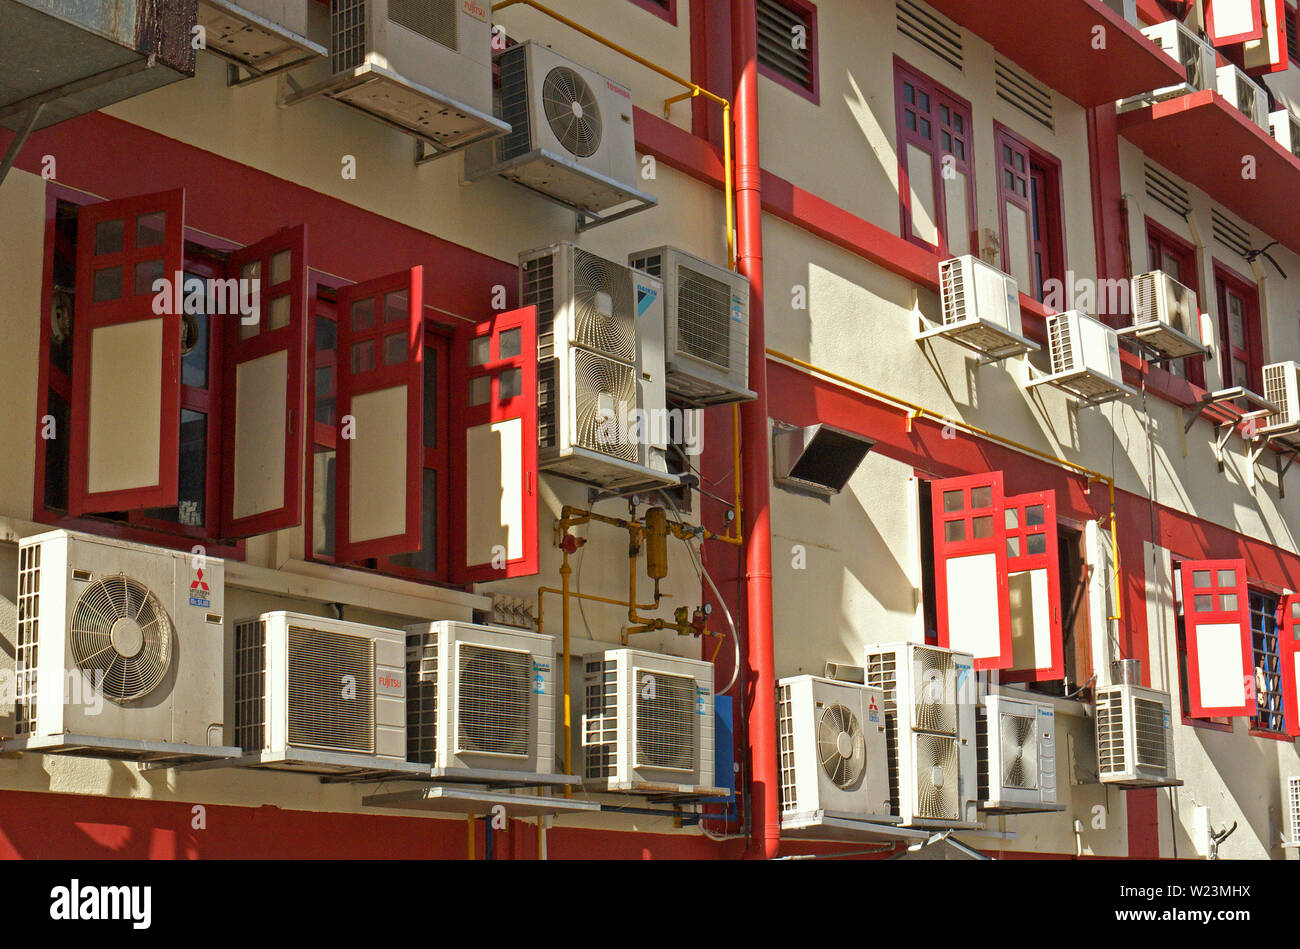 singapore, singapore - november 29, 2011: facade of a residential house in geylang with a large number of air conditioning units Stock Photo